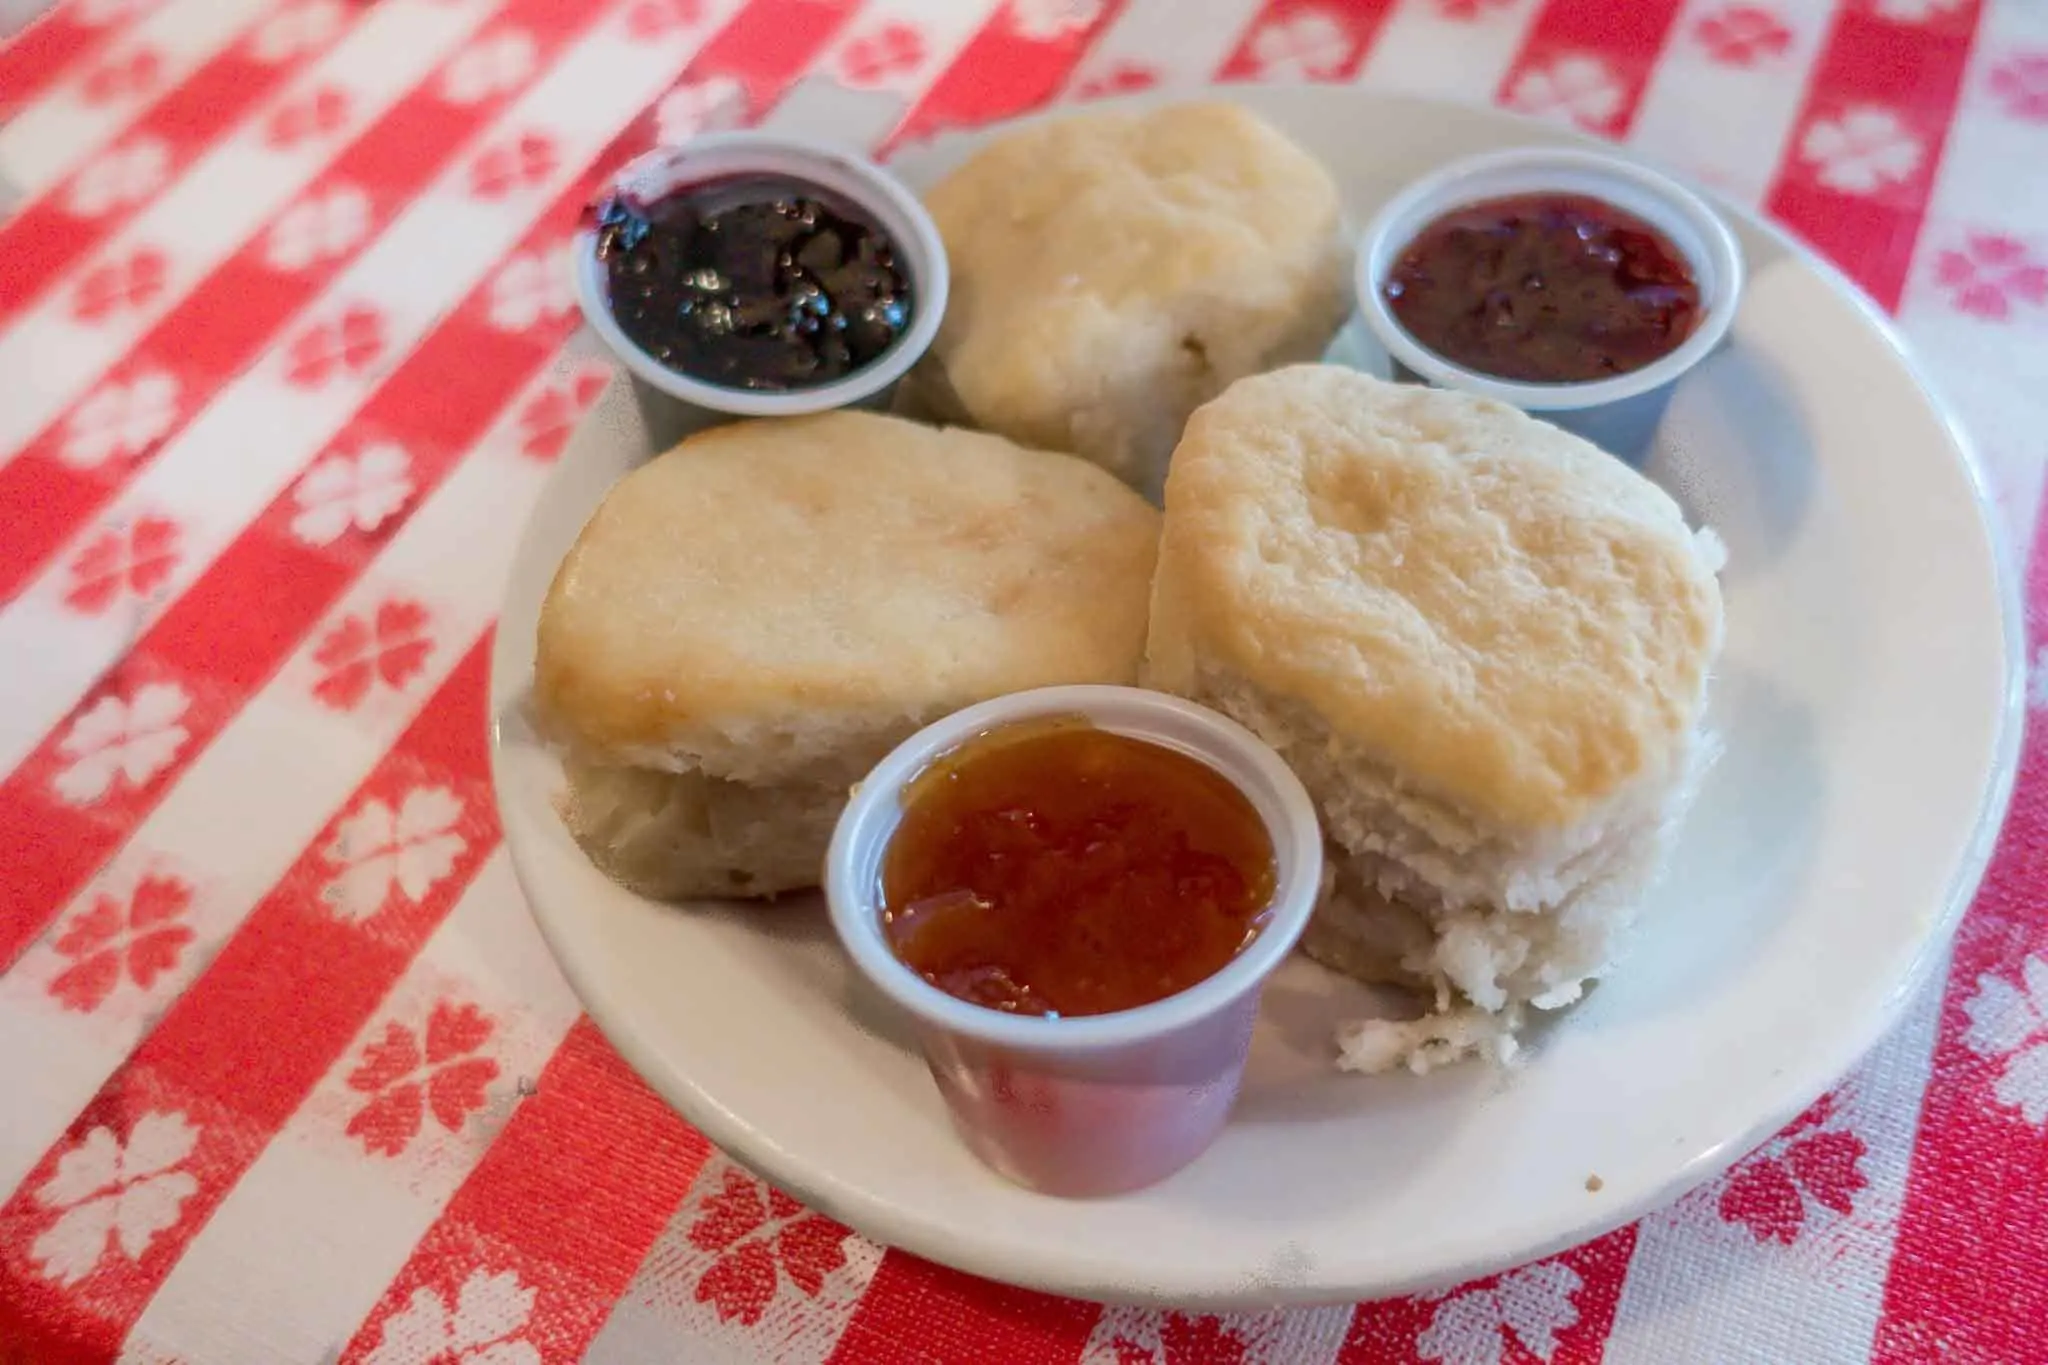 Biscuits and jam on a plate.